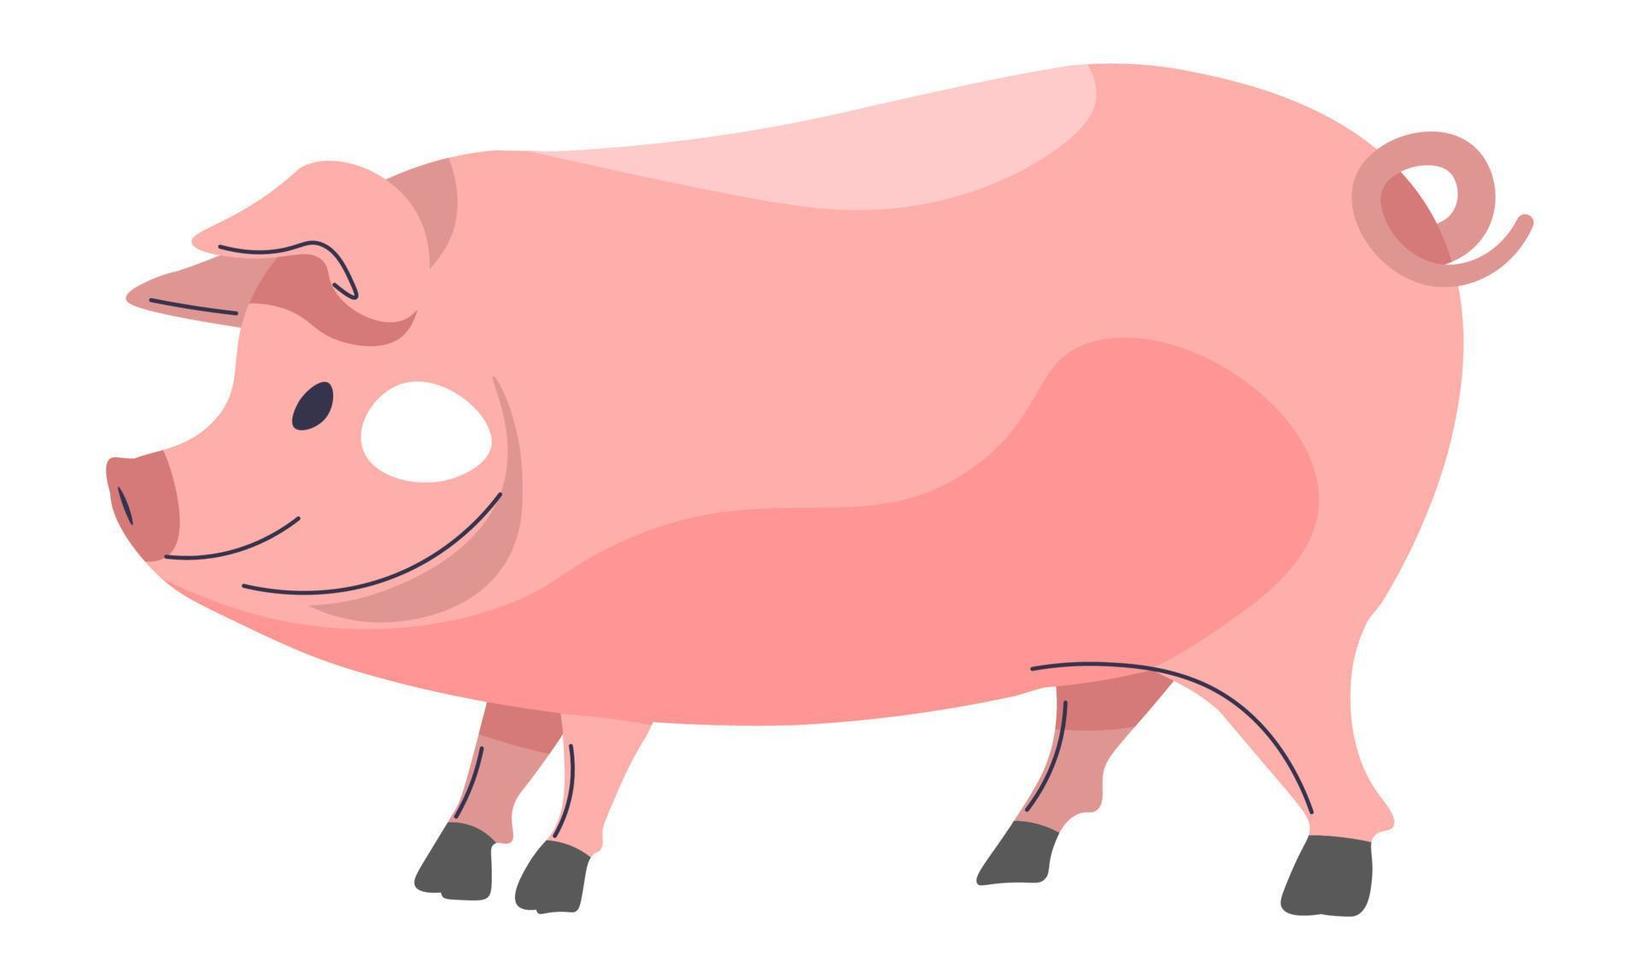 Pig livestock domestic animal, farming agriculture vector